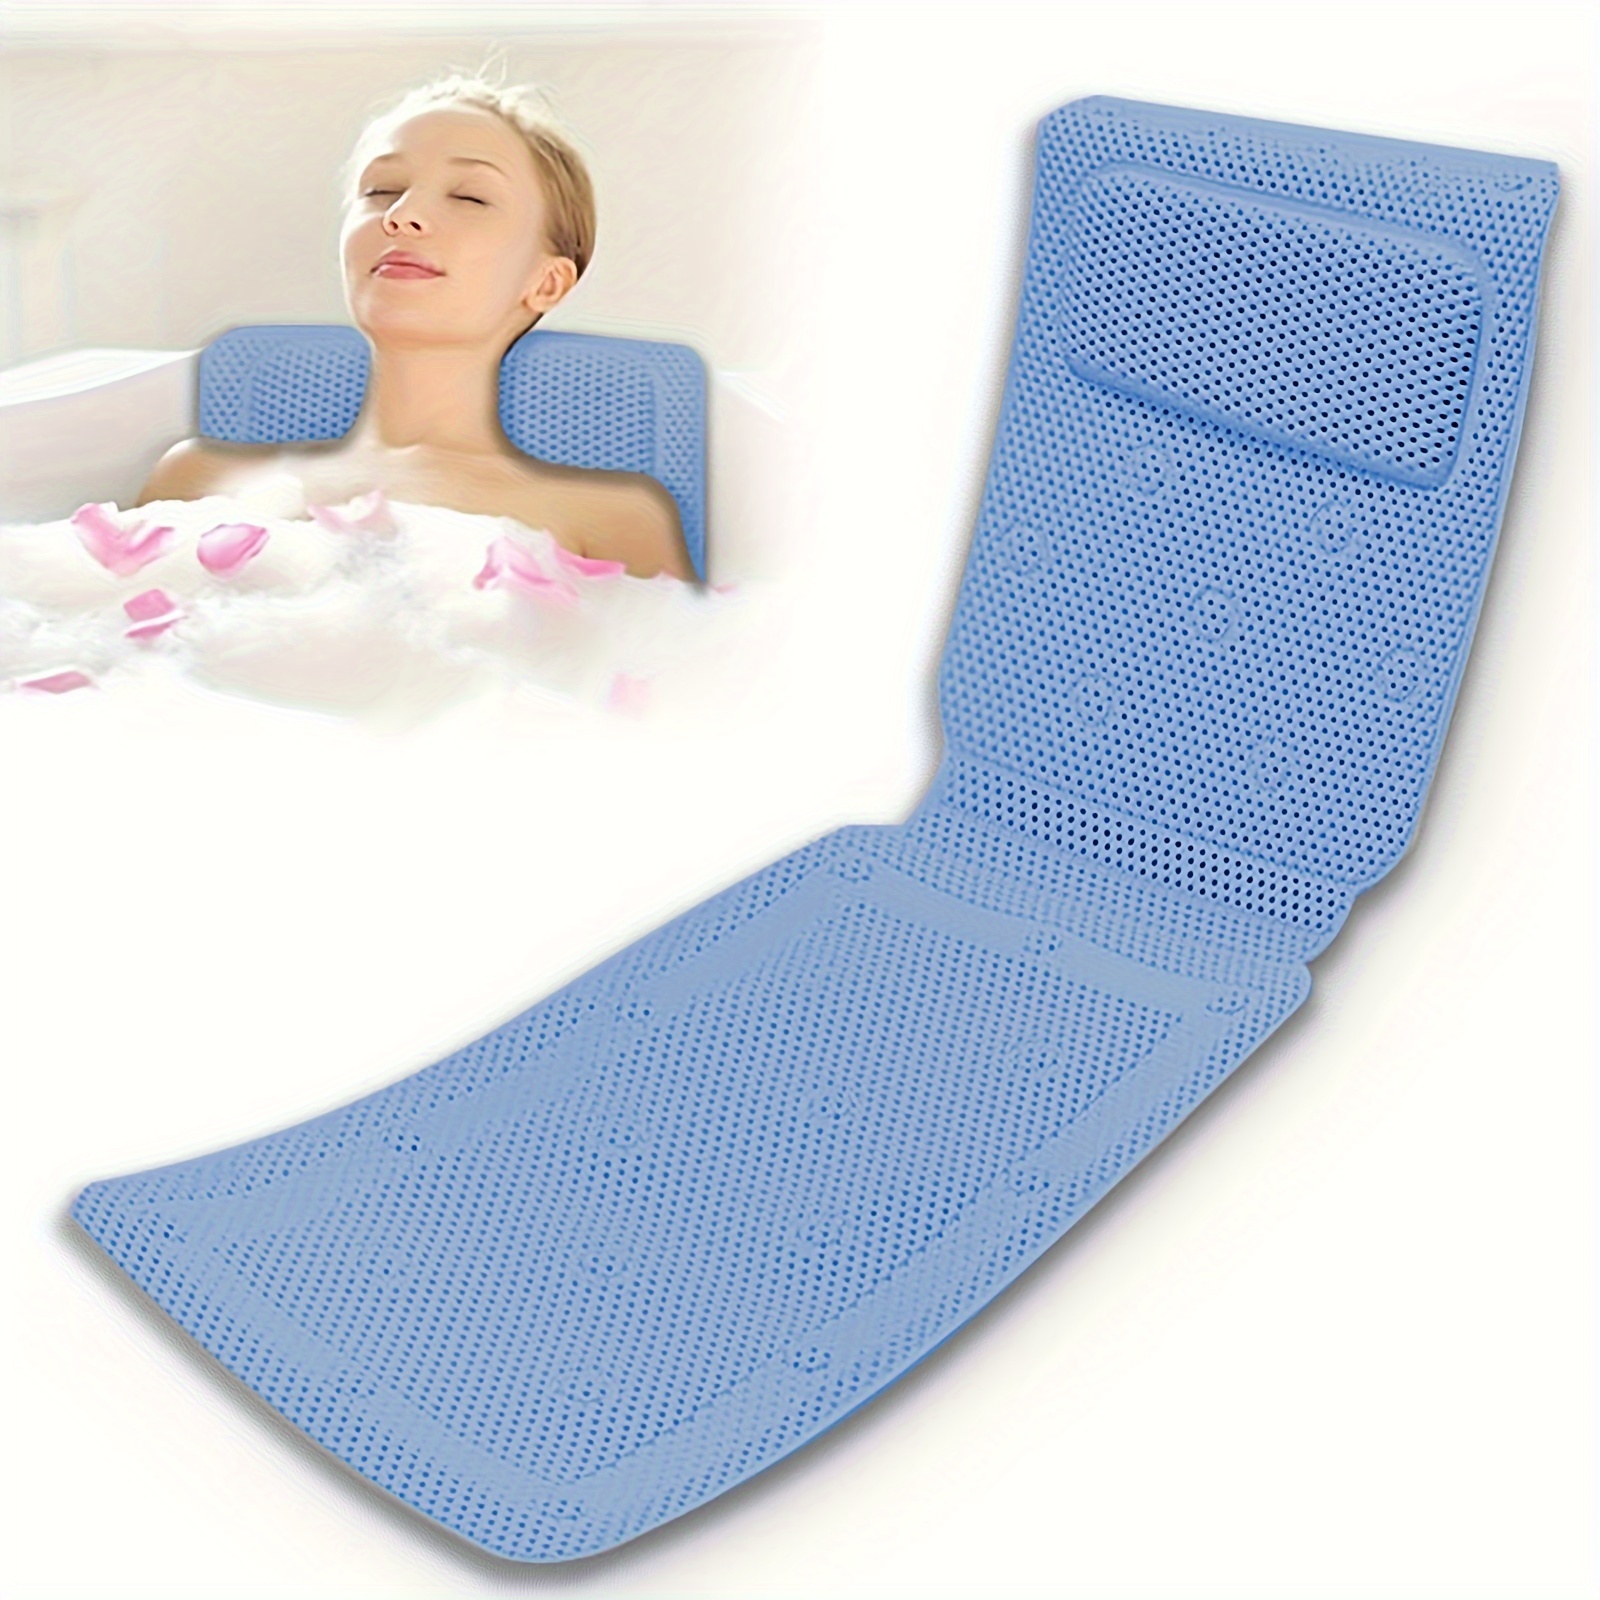 

Full Body Bath Pillow With 30 Non-slip Suction Cups, 3d Air Mesh Technology, Soft Pvc Spa Bathtub Mattress Pad For Head And Neck Rest, Breathable And Comfortable Bath Cushion